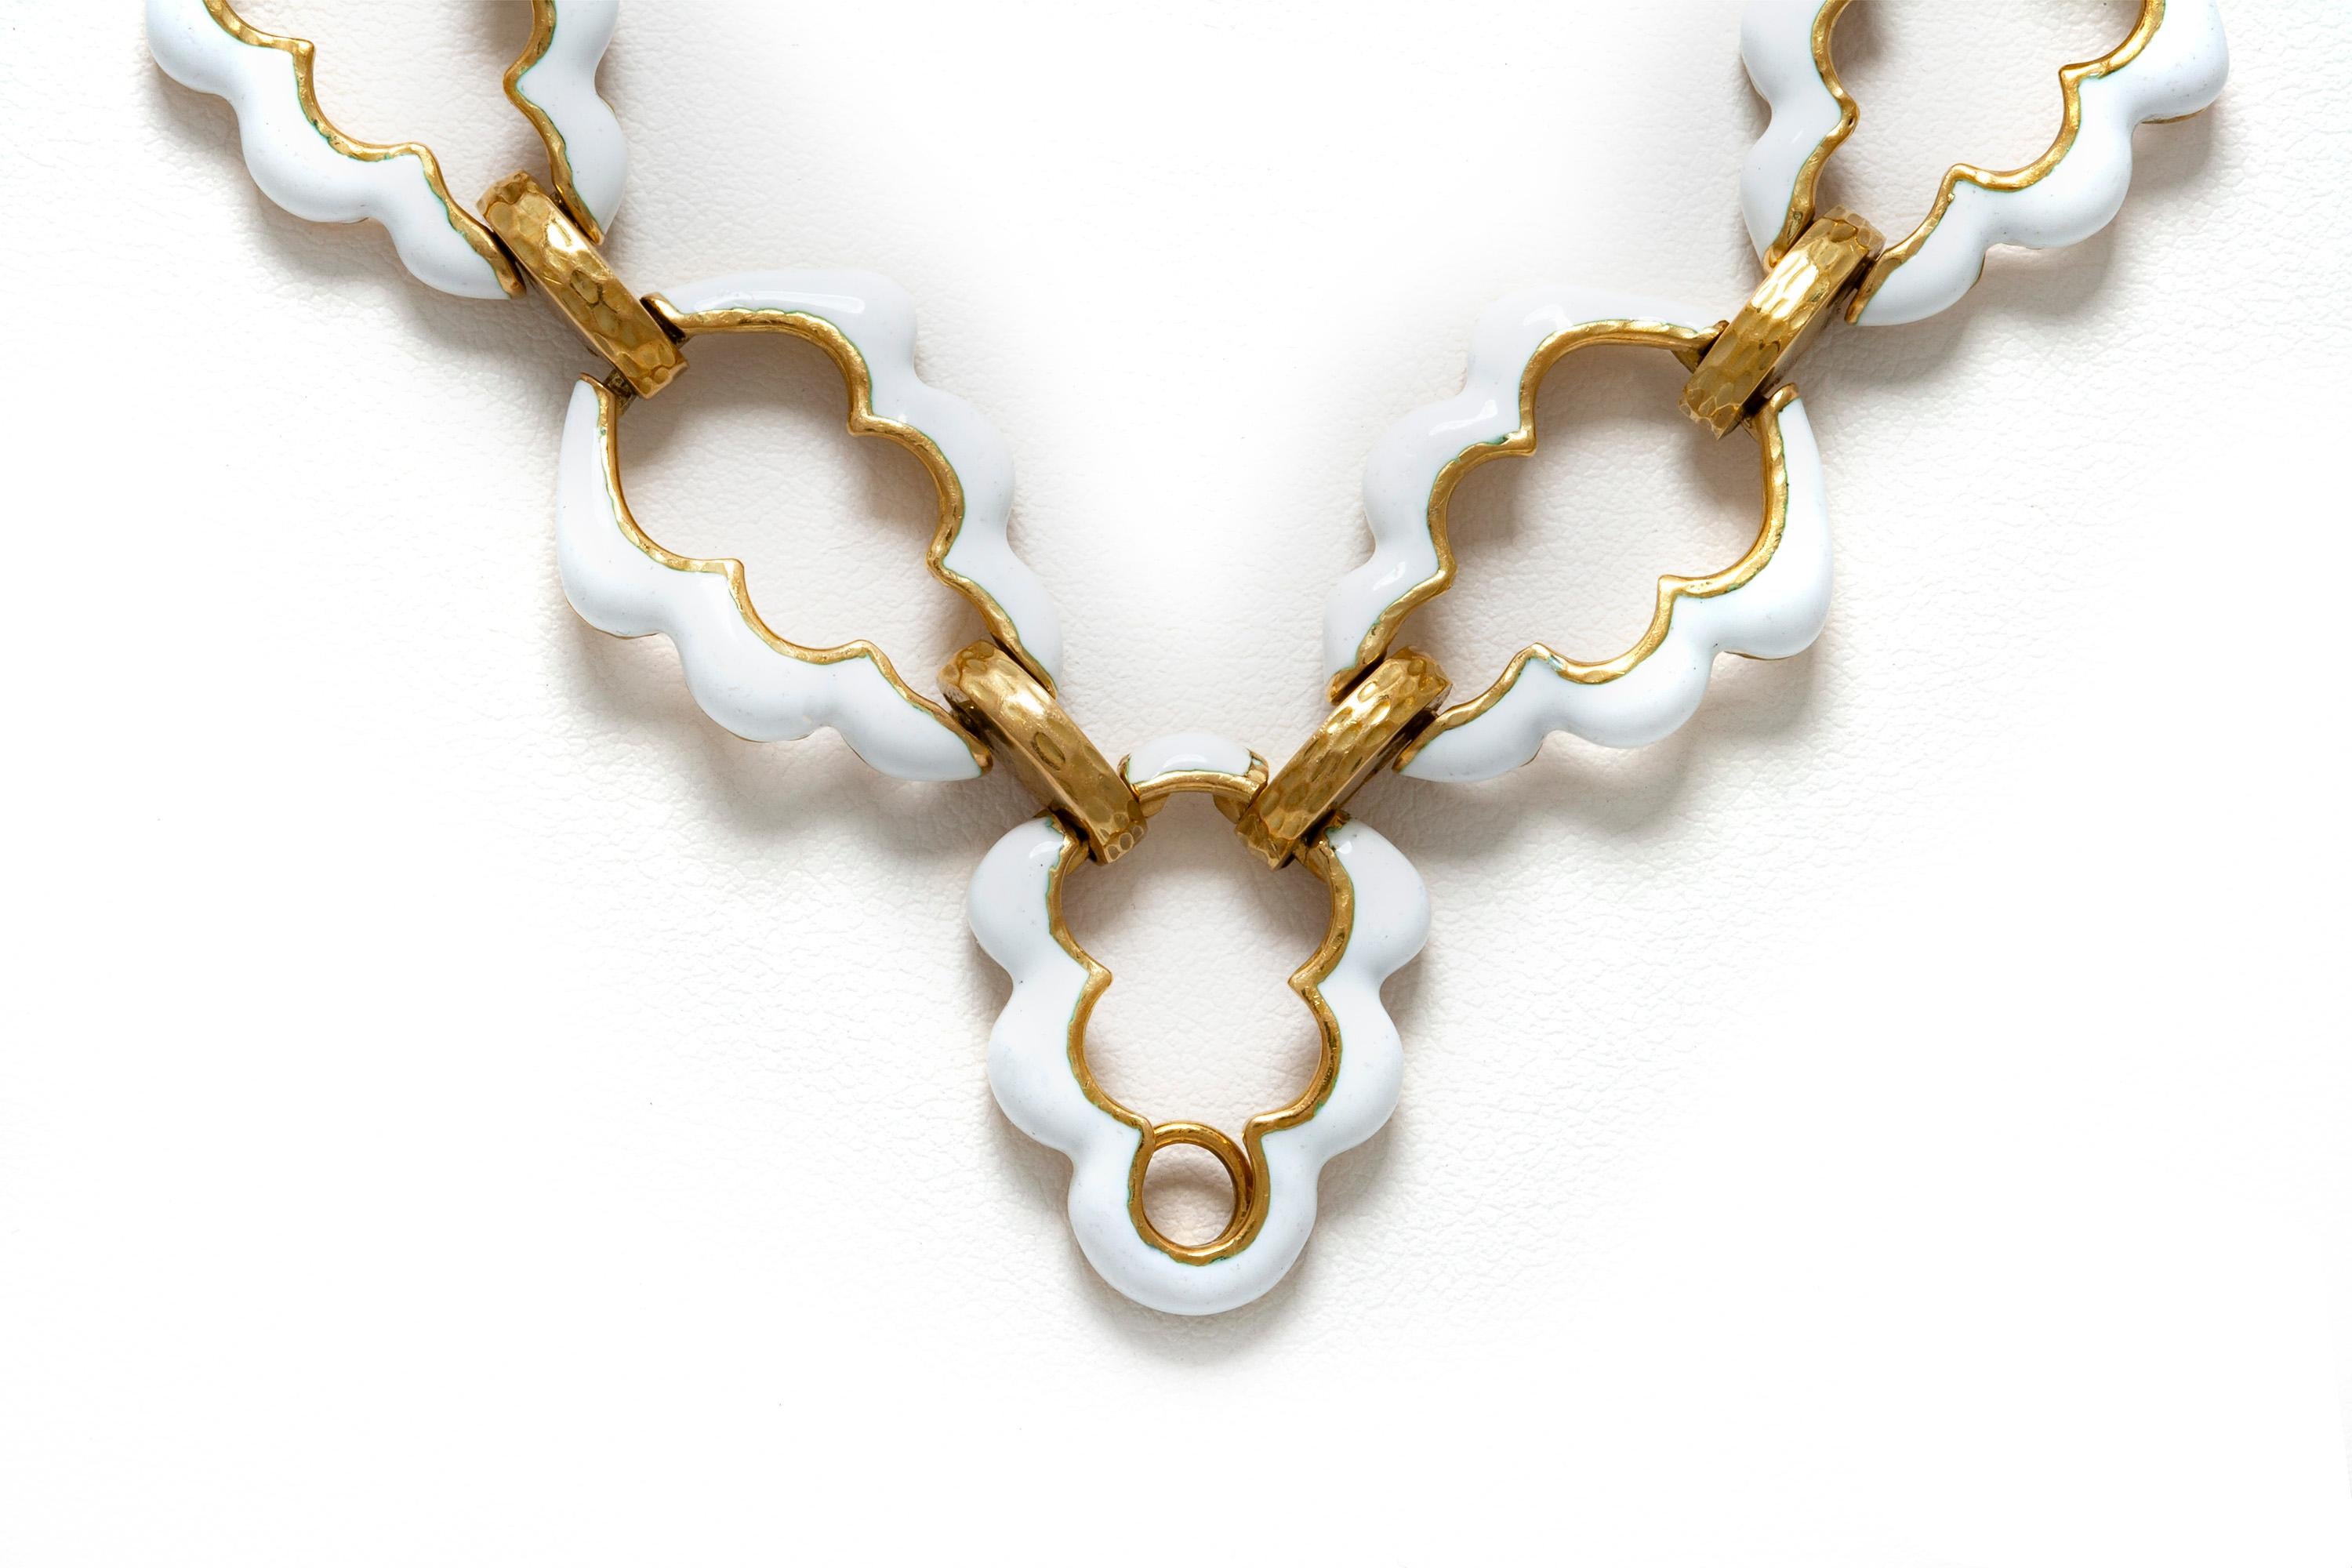 David webb white enamel long necklace finely crafted in 18k yellow gold composed with open work fancy -shaped with white enamel.
